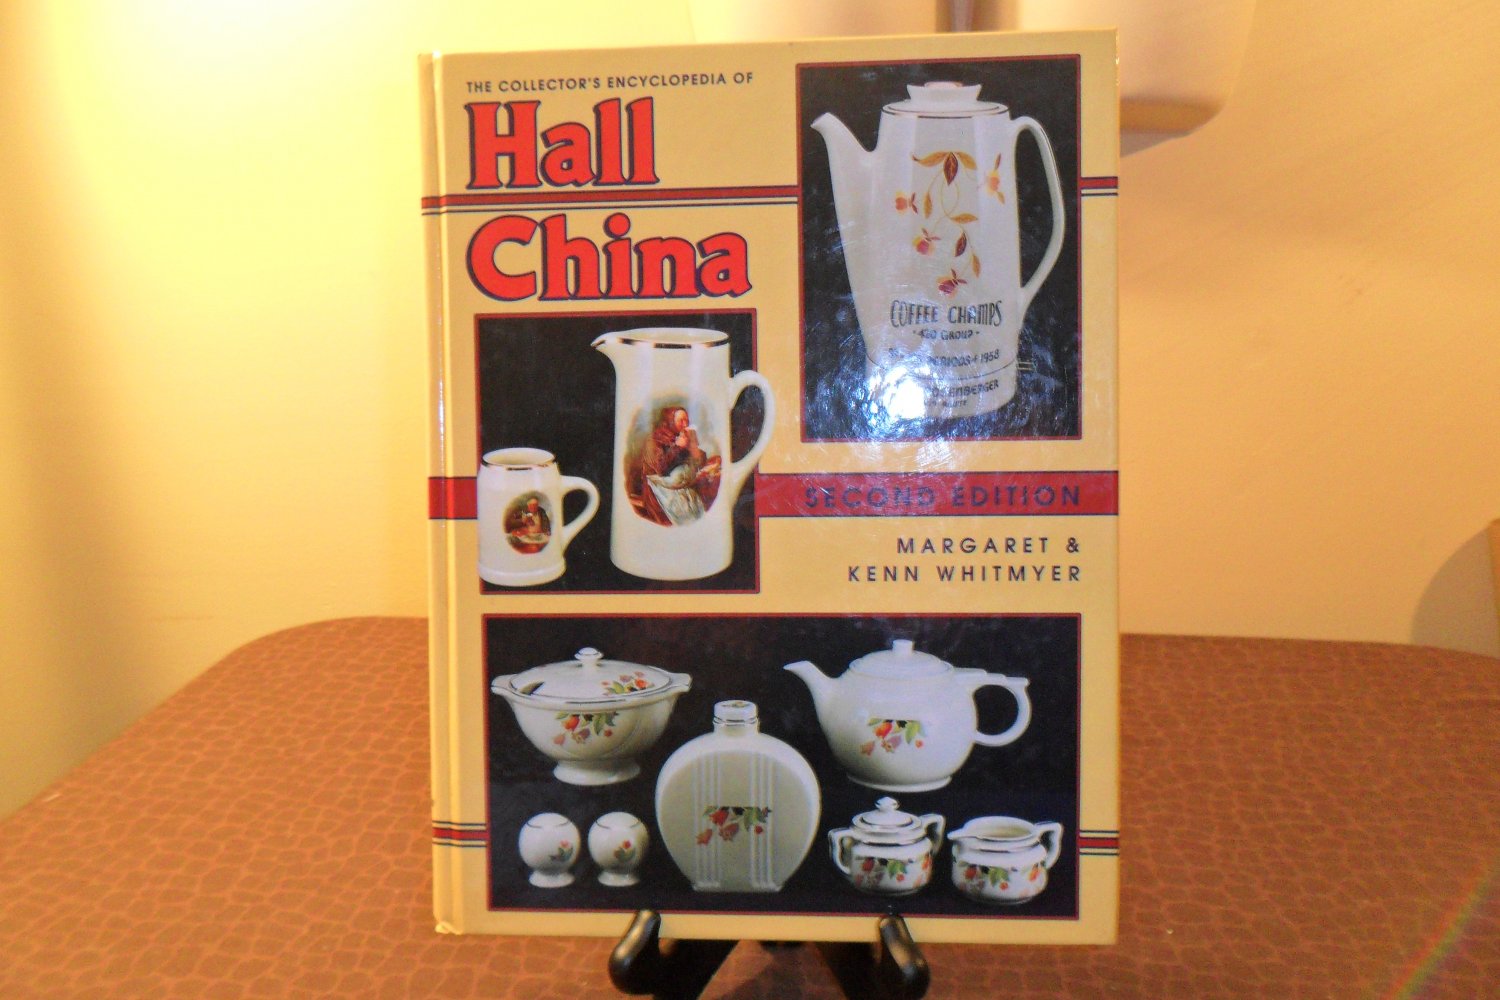 The Collector's Encyclopedia Of Hall China 2nd Edition Margret & Kenn Whitmyer Book